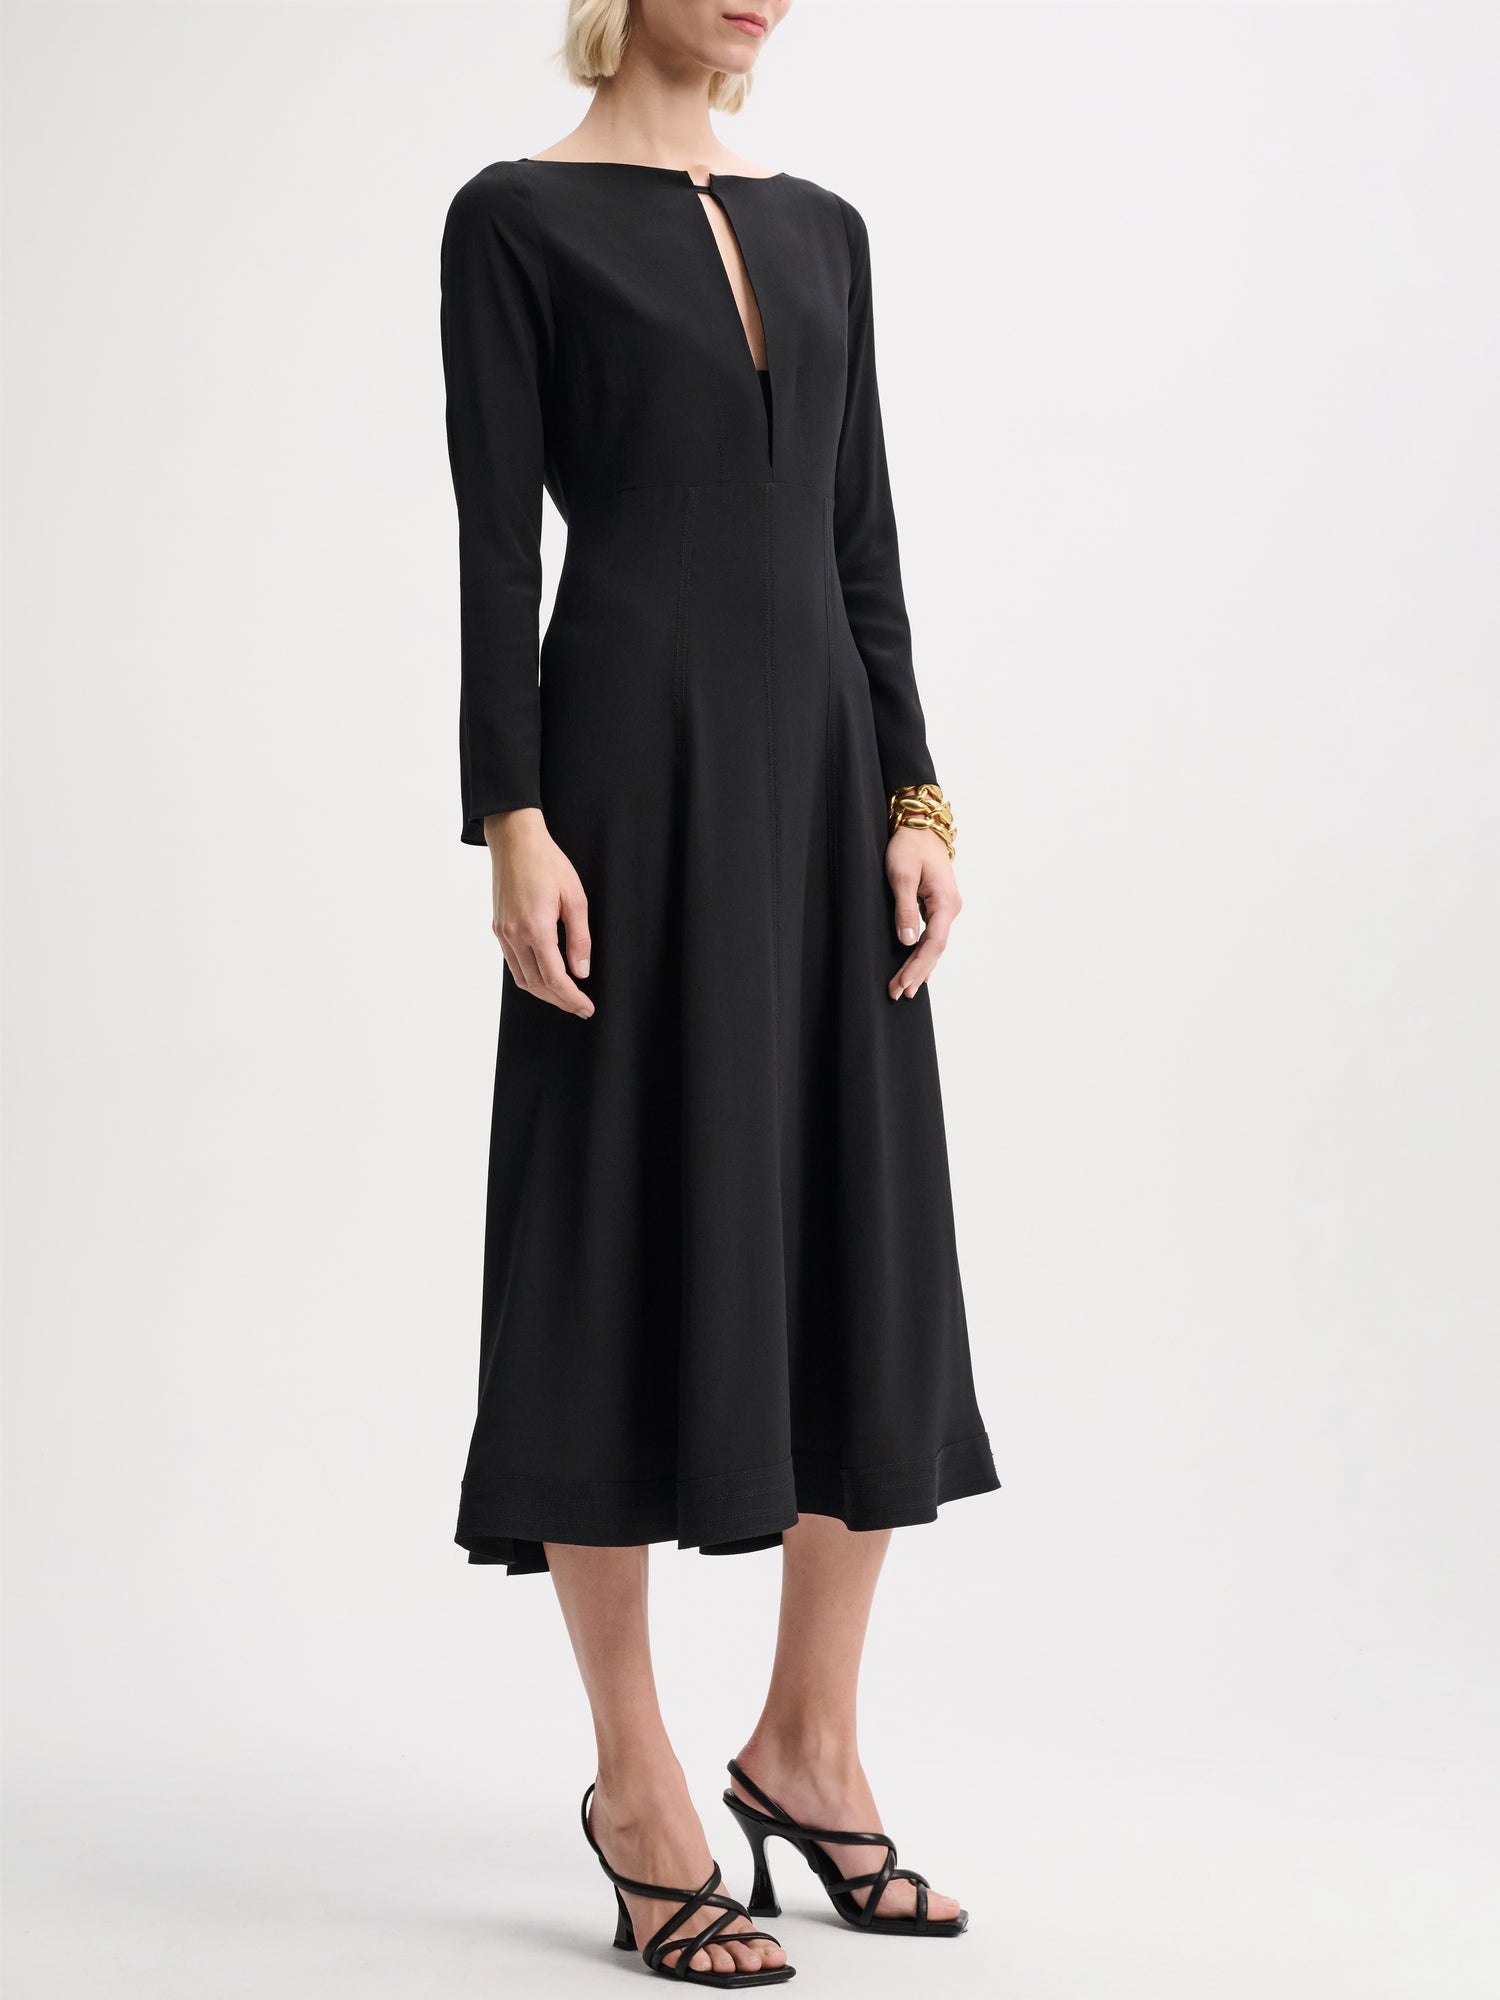 SOPHISTICATED VOLUMES dress, pure black